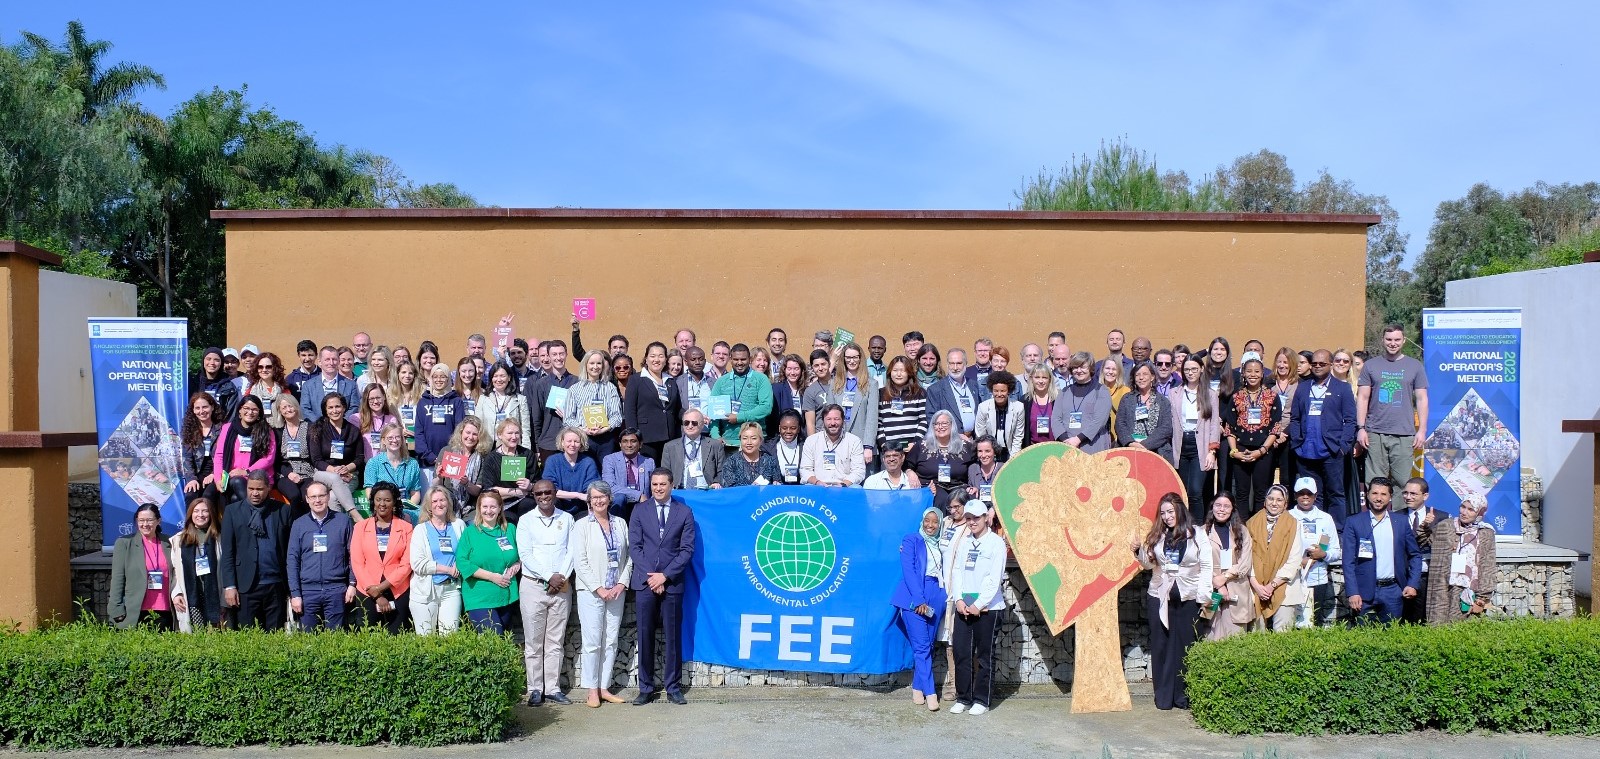 The Hassan II International Environmental Training Center hosts the annual National Operator’s Meeting (NOM) of the Foundation for Environmental Education